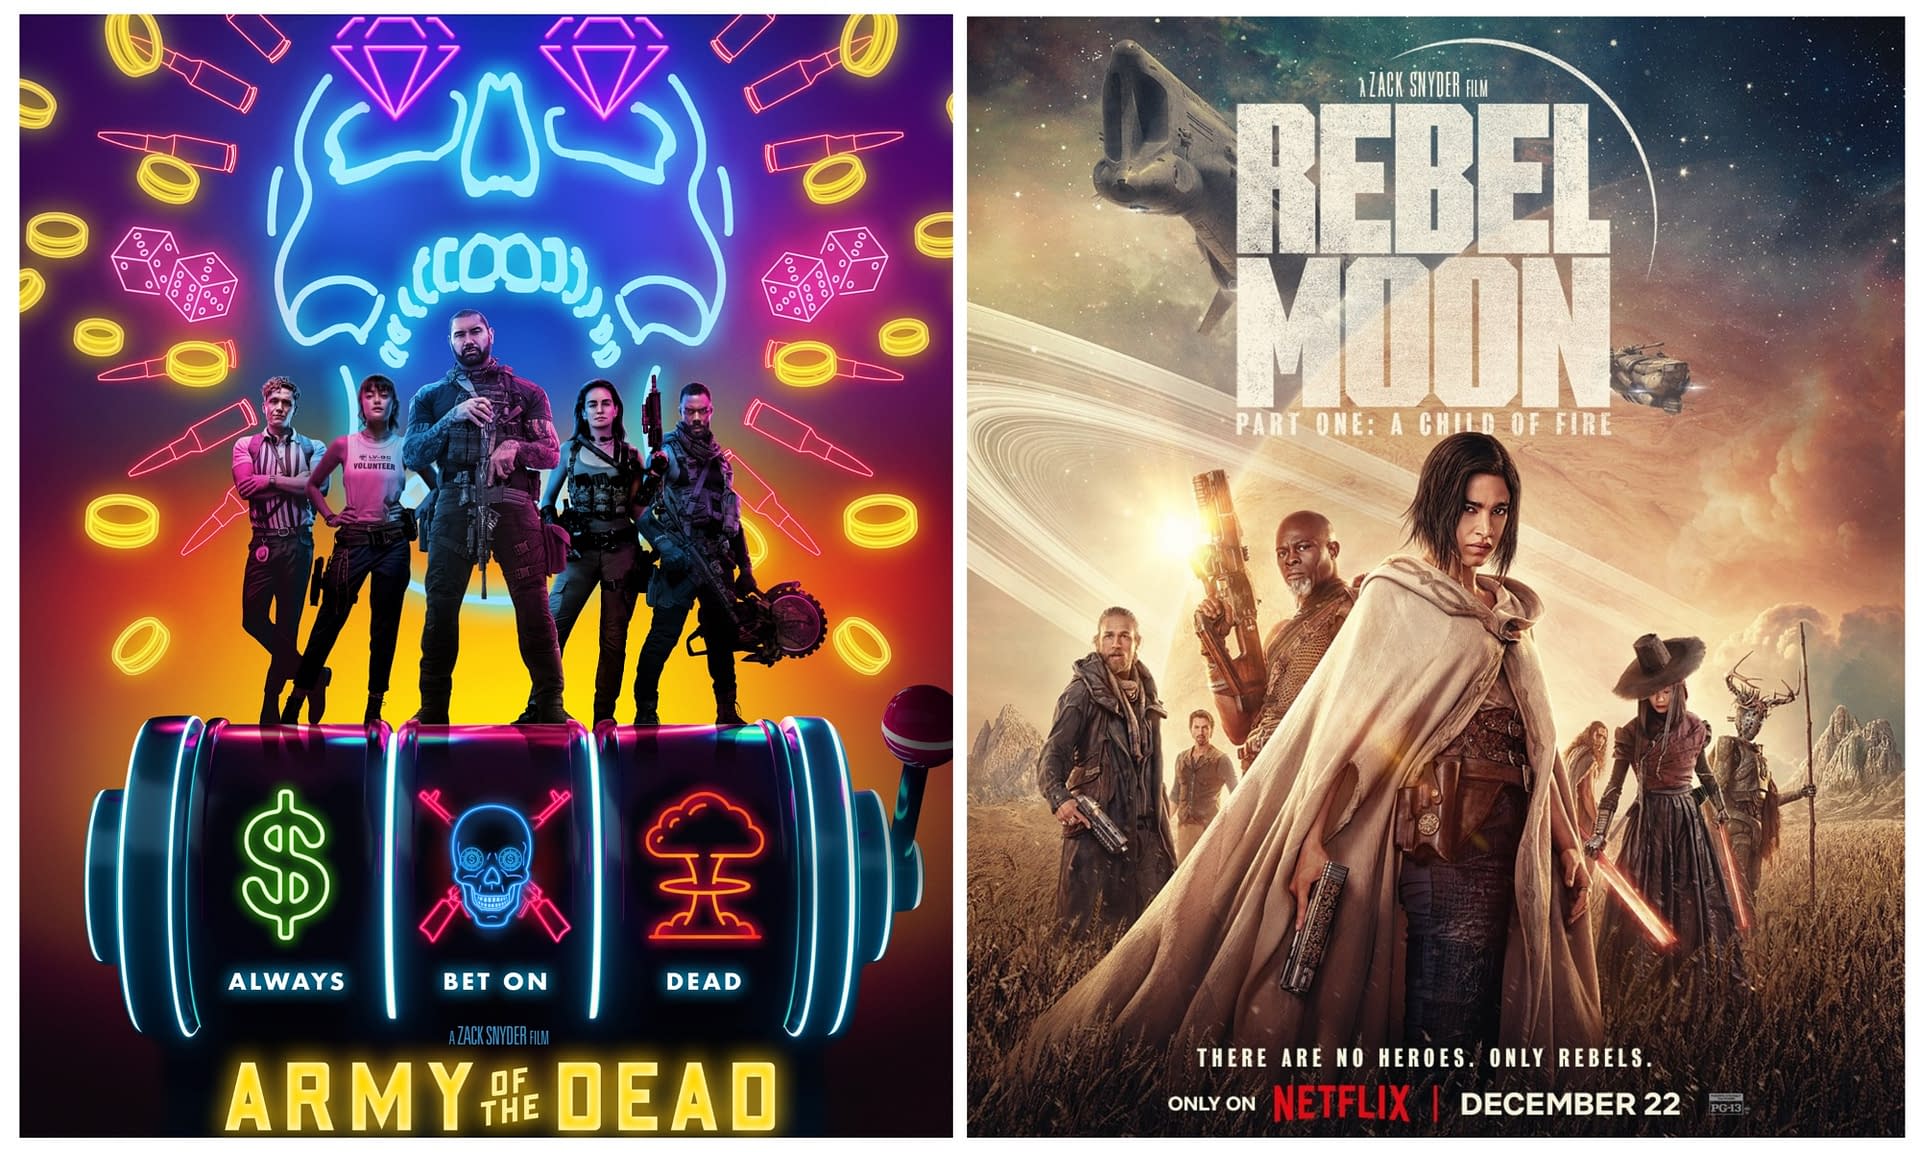 Rebel Moon & Army Of The Dead Share A Universe: A SnyderVerse